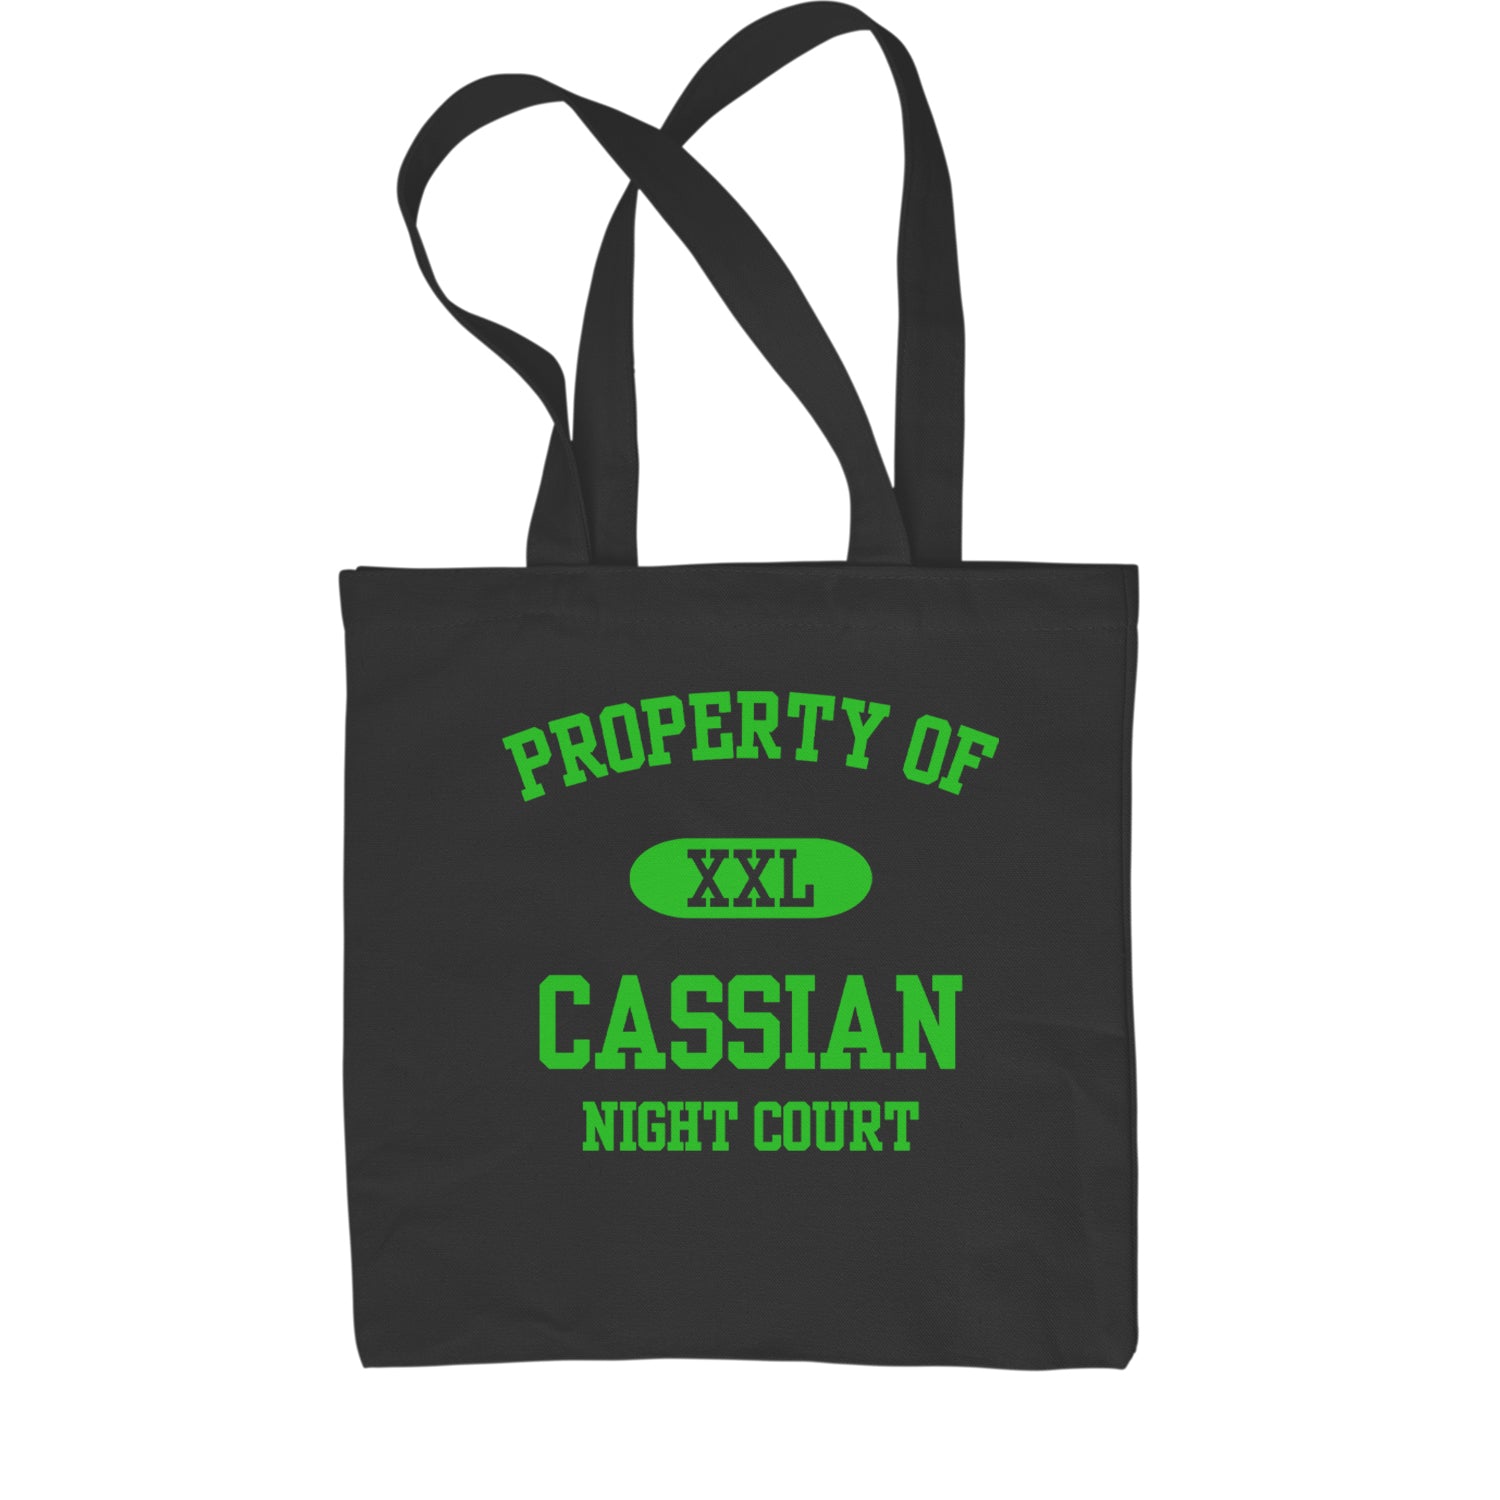 Property Of Cassian ACOTAR Shopping Tote Bag acotar, court, maas, tamlin, thorns by Expression Tees